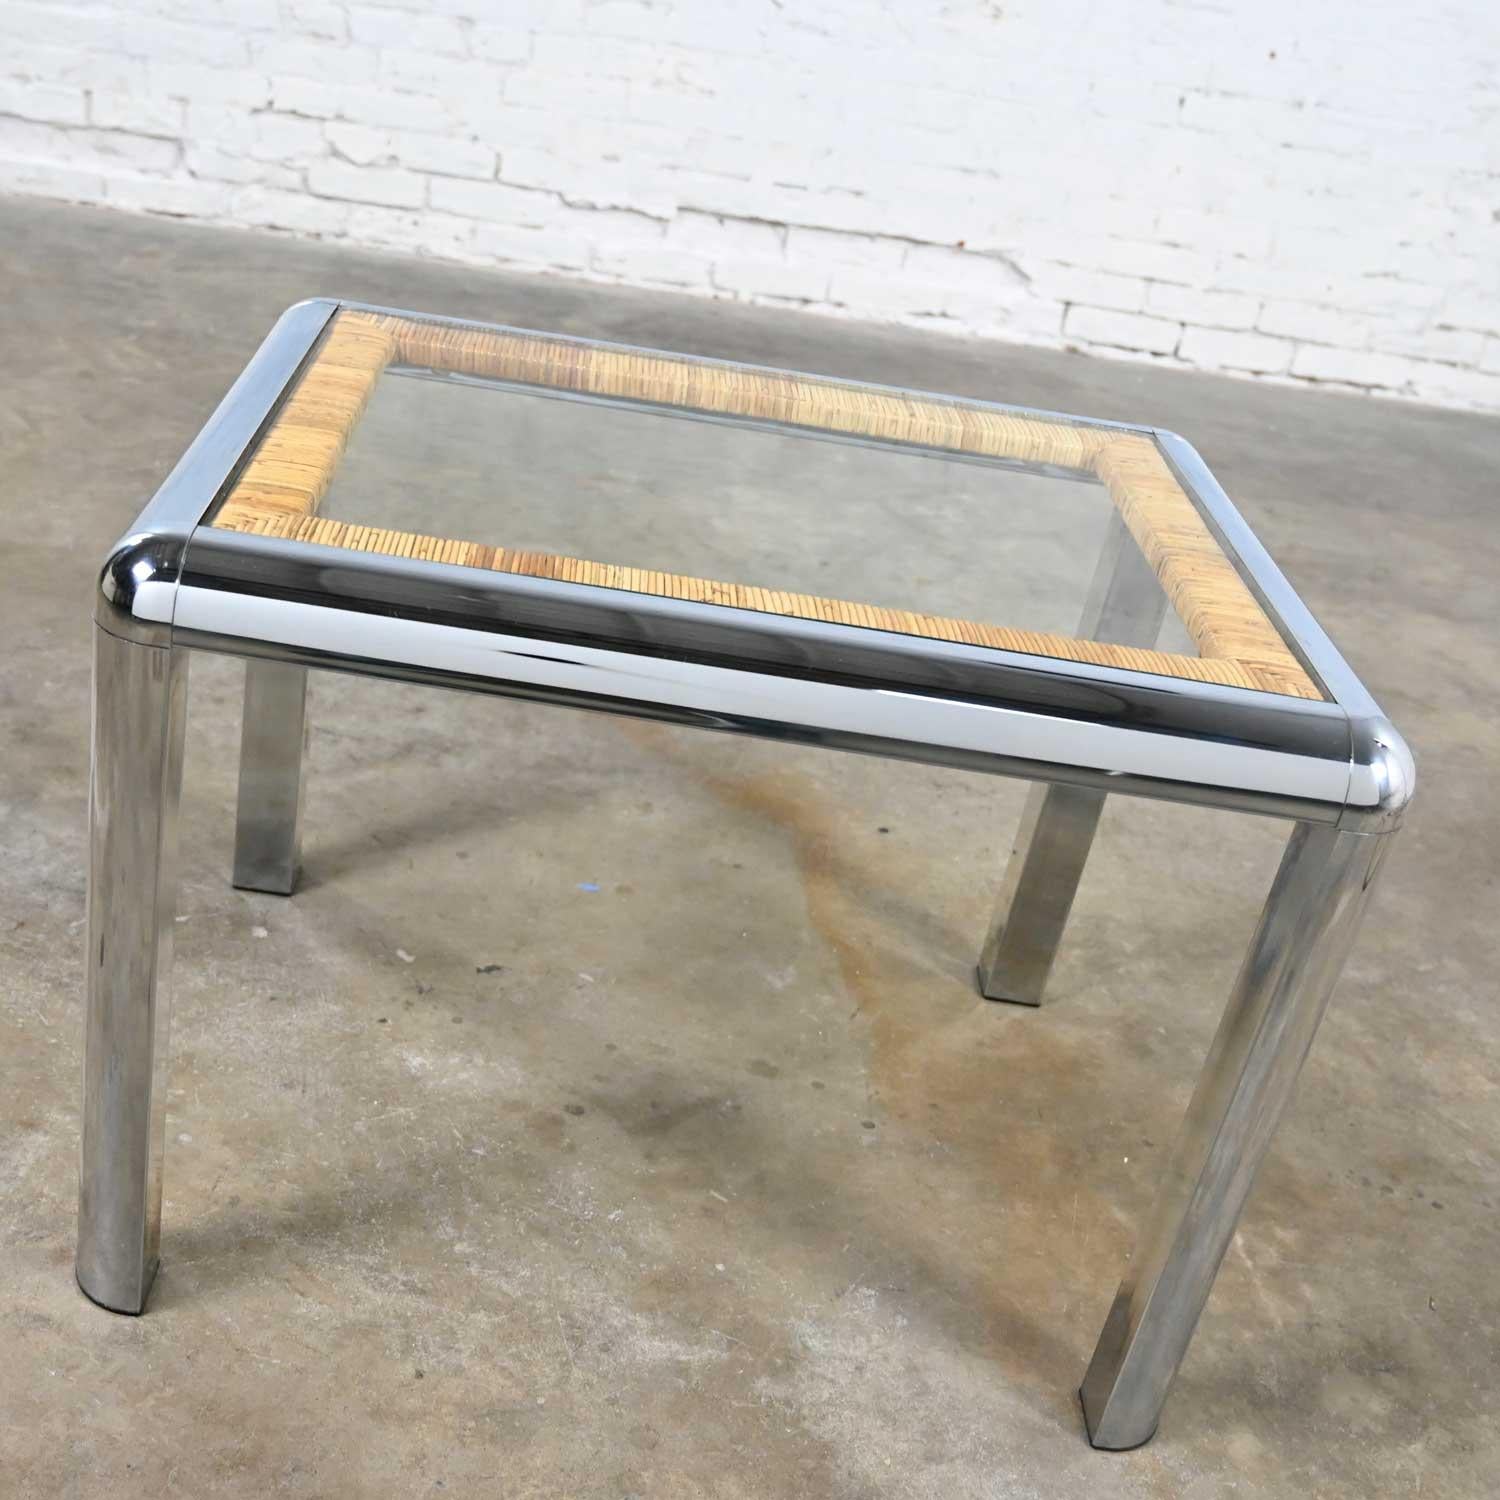 Stunning vintage modern rectangular chrome, glass, and wrapped rattan side table attributed to DIA (Design Institute of America). Beautiful condition, keeping in mind that this is vintage and not new so will have signs of use and wear. Please see